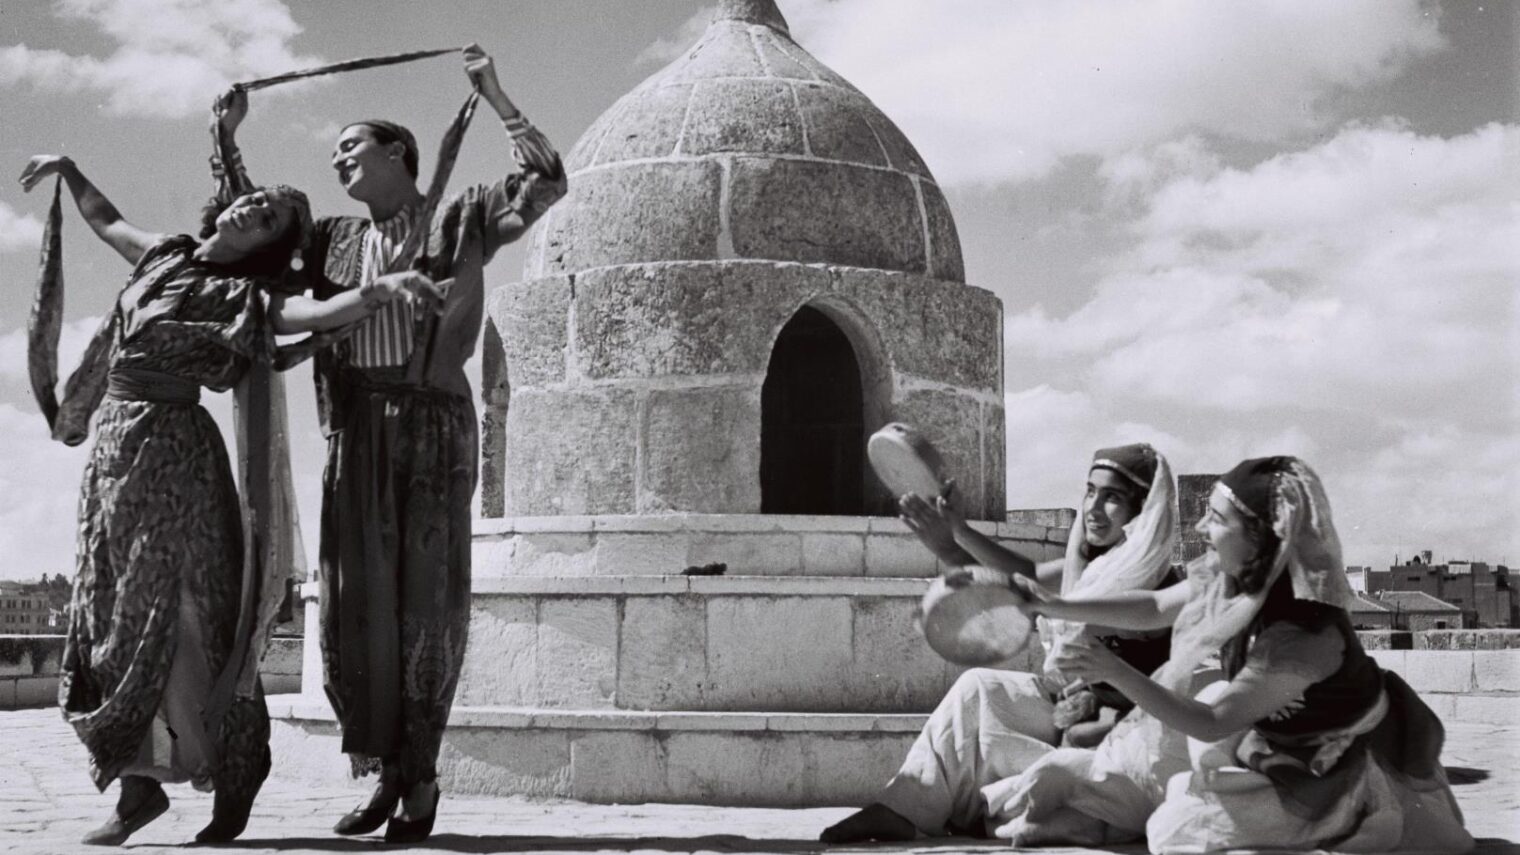 A Bucharian dance performed by members of the Rina Nikova ballet in the Citadel in Jerusalem (1946). Photo by Zoltan Kluger for GPO